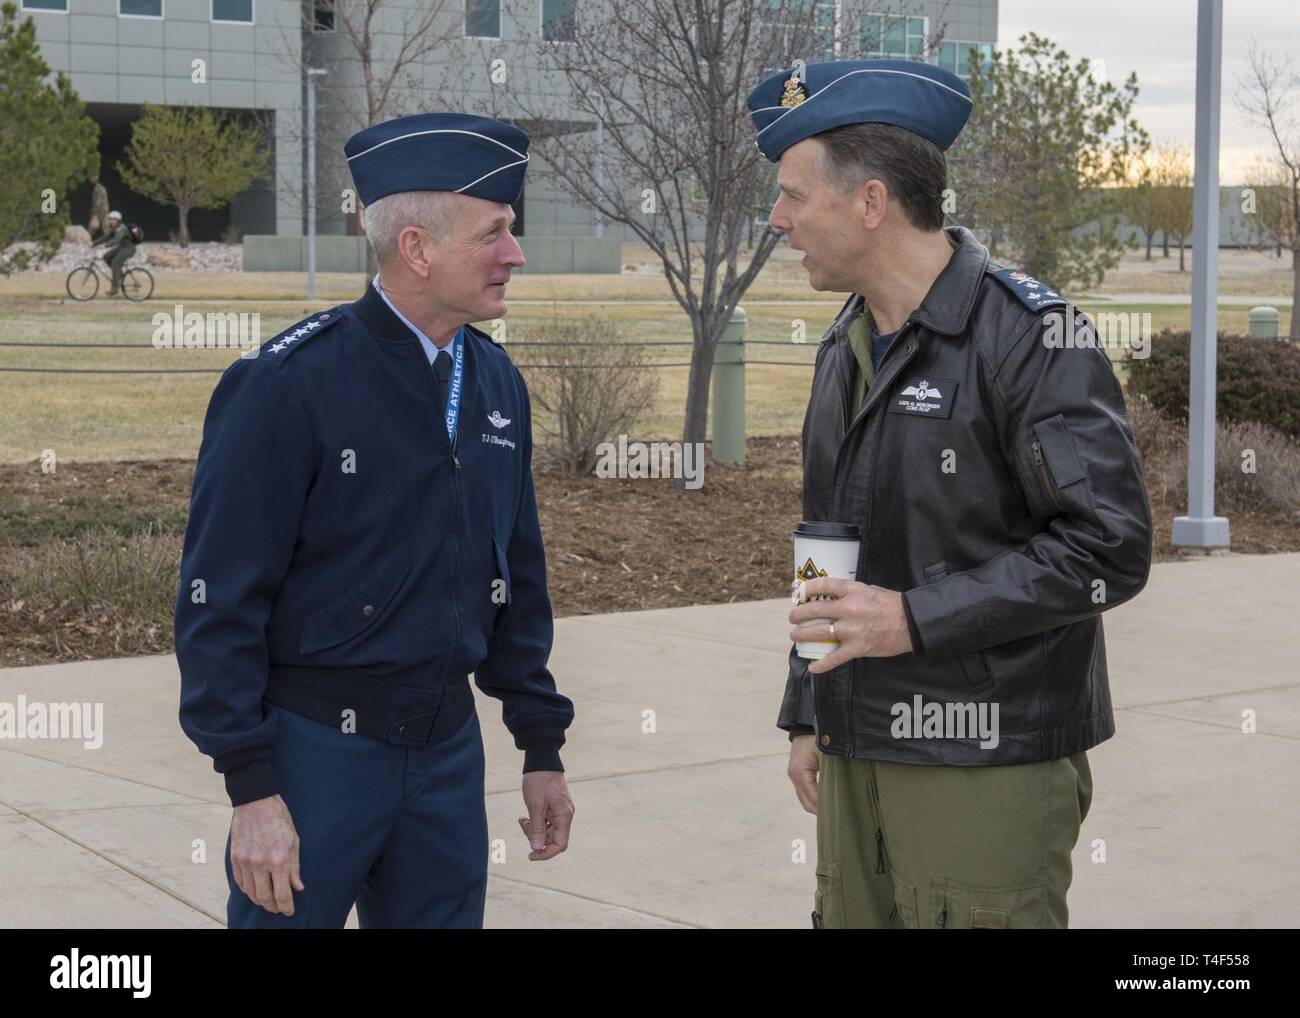 U.S. Air Force Gen. Terrence J. O'Shaughnessy, Commander, North American Aerospace Defense Command and U.S. Northern Command welcomes Royal Canadian Air Force Commander, Lieutenant-General Al Meinzinger to the headquarters in Colorado Springs, Colorado, April 9, 2019. Lieutenant-General Meinzinger's visit is to discuss NORAD modernization efforts and the strong relationship between the RCAF and NORAD. Stock Photo